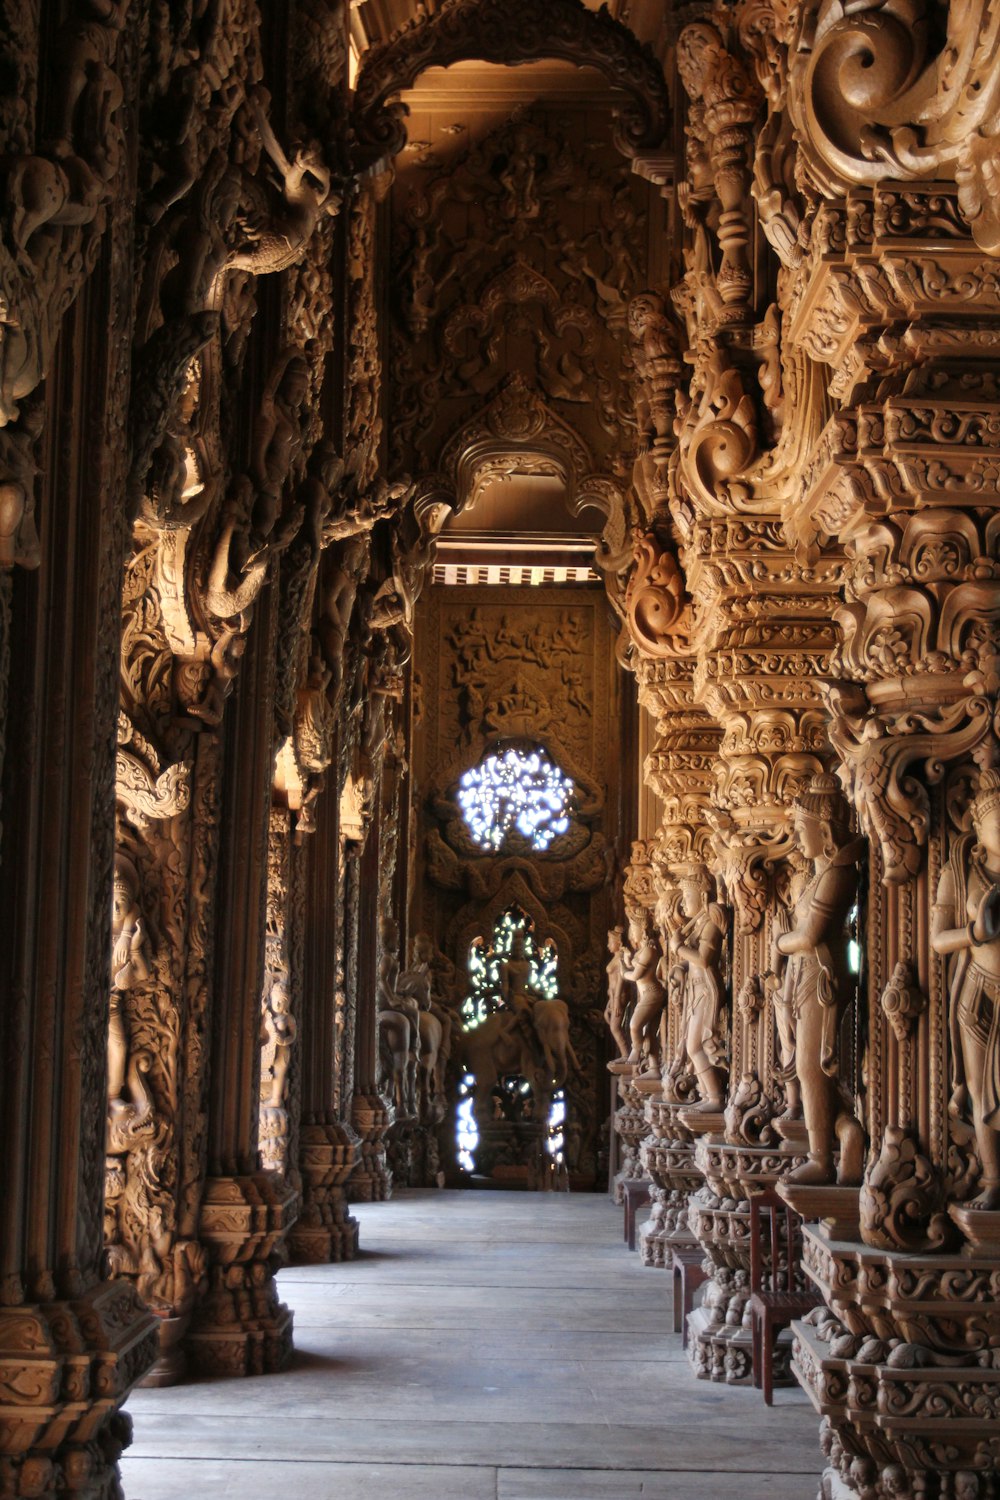 a long hallway with intricate carvings on the walls